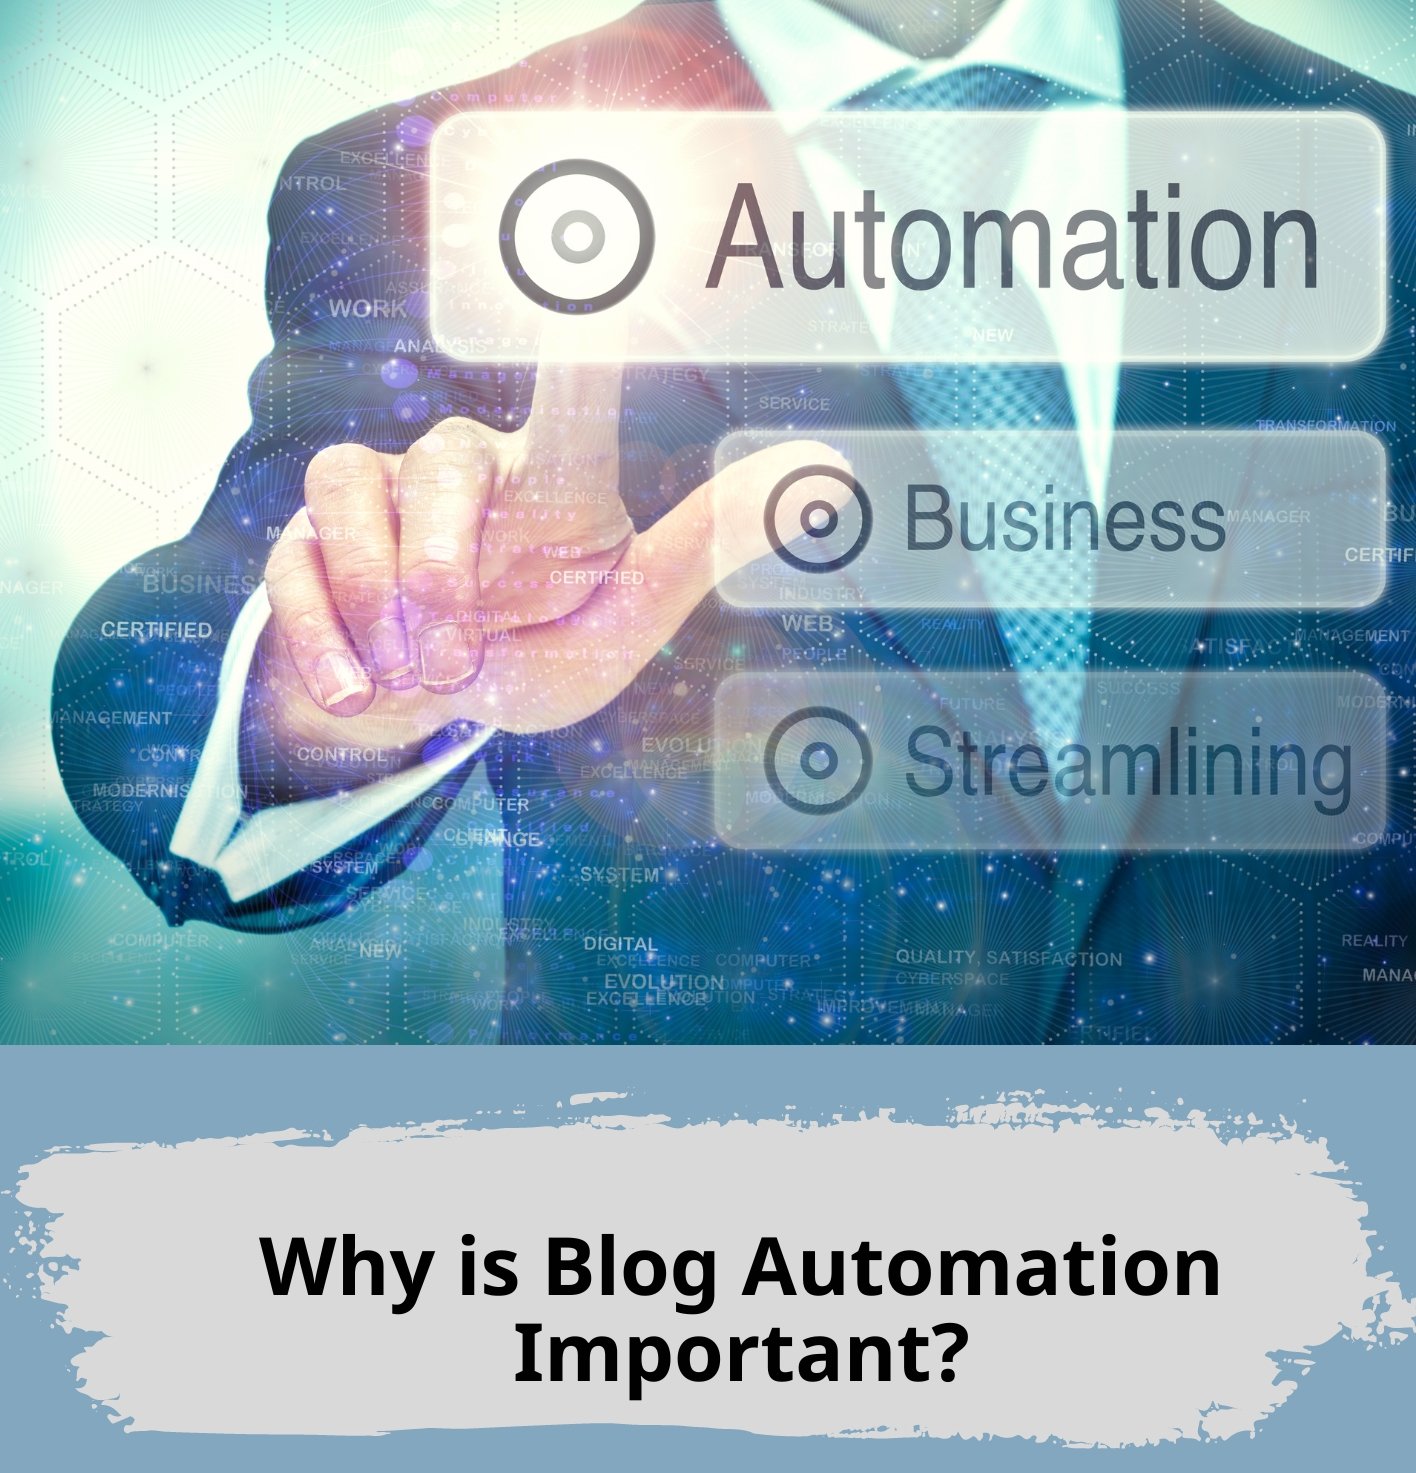 Why is Blog Automation Important?